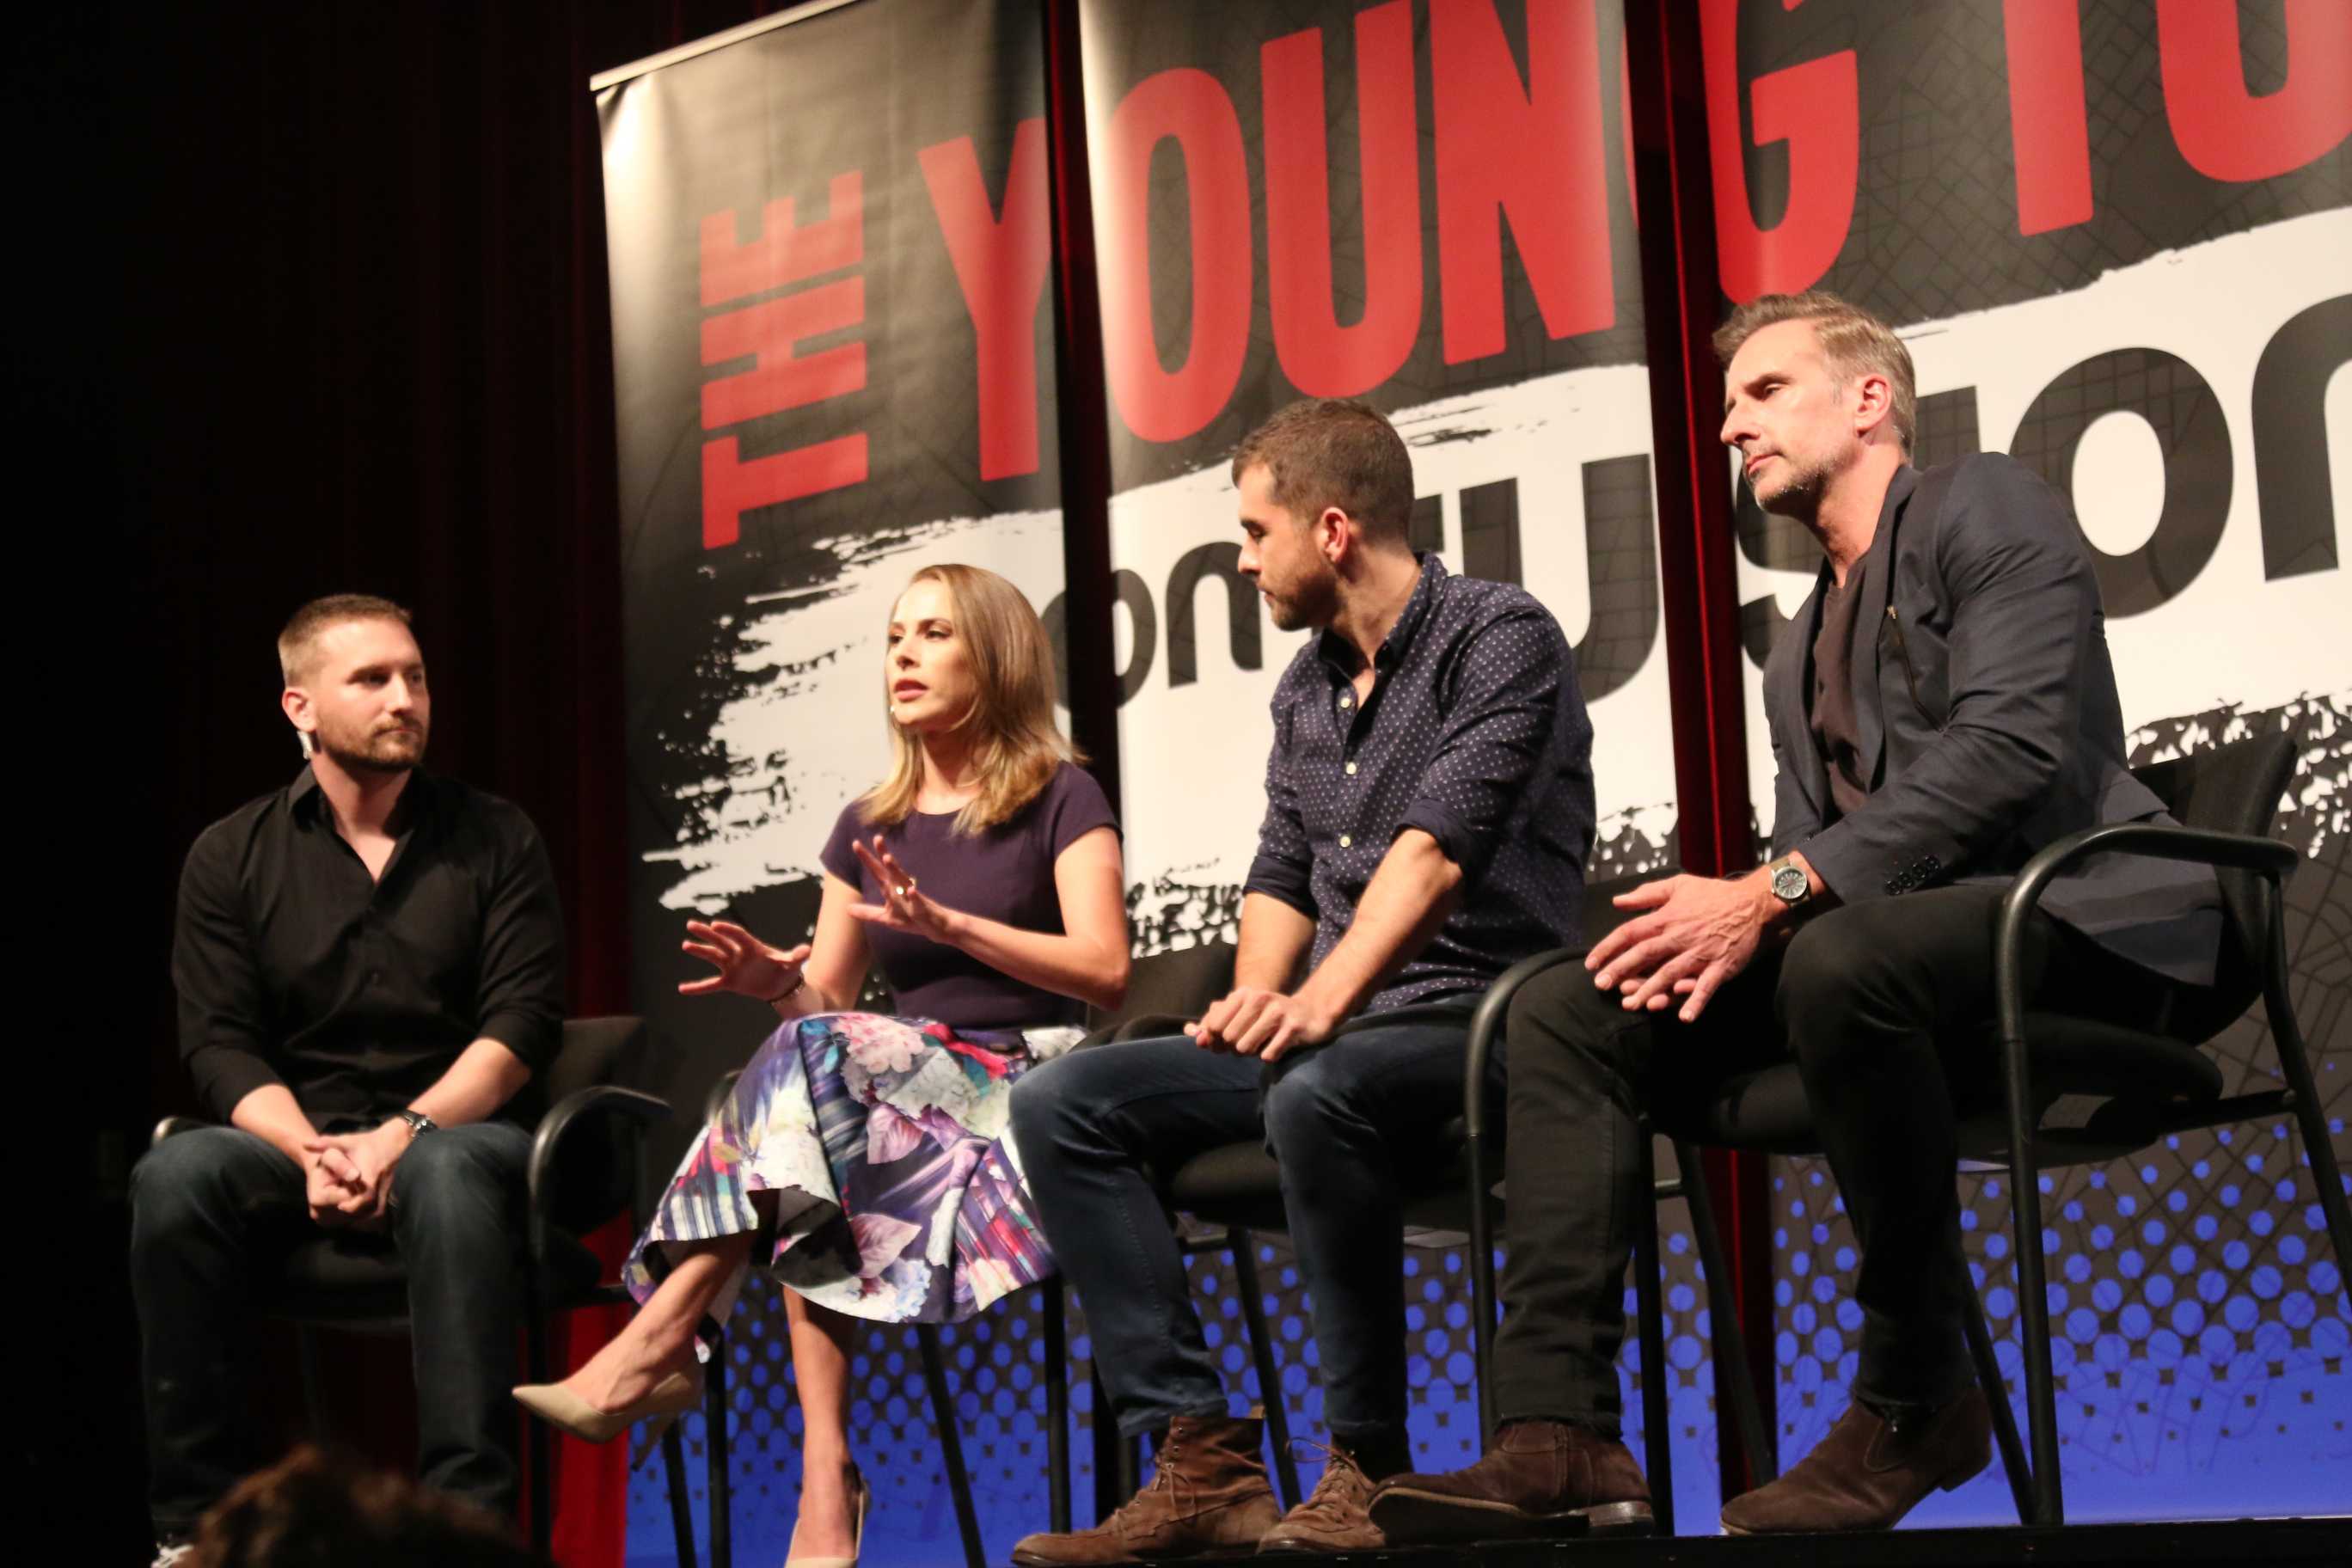 Photo shows four members of the Young Turks seated at a discussion panel